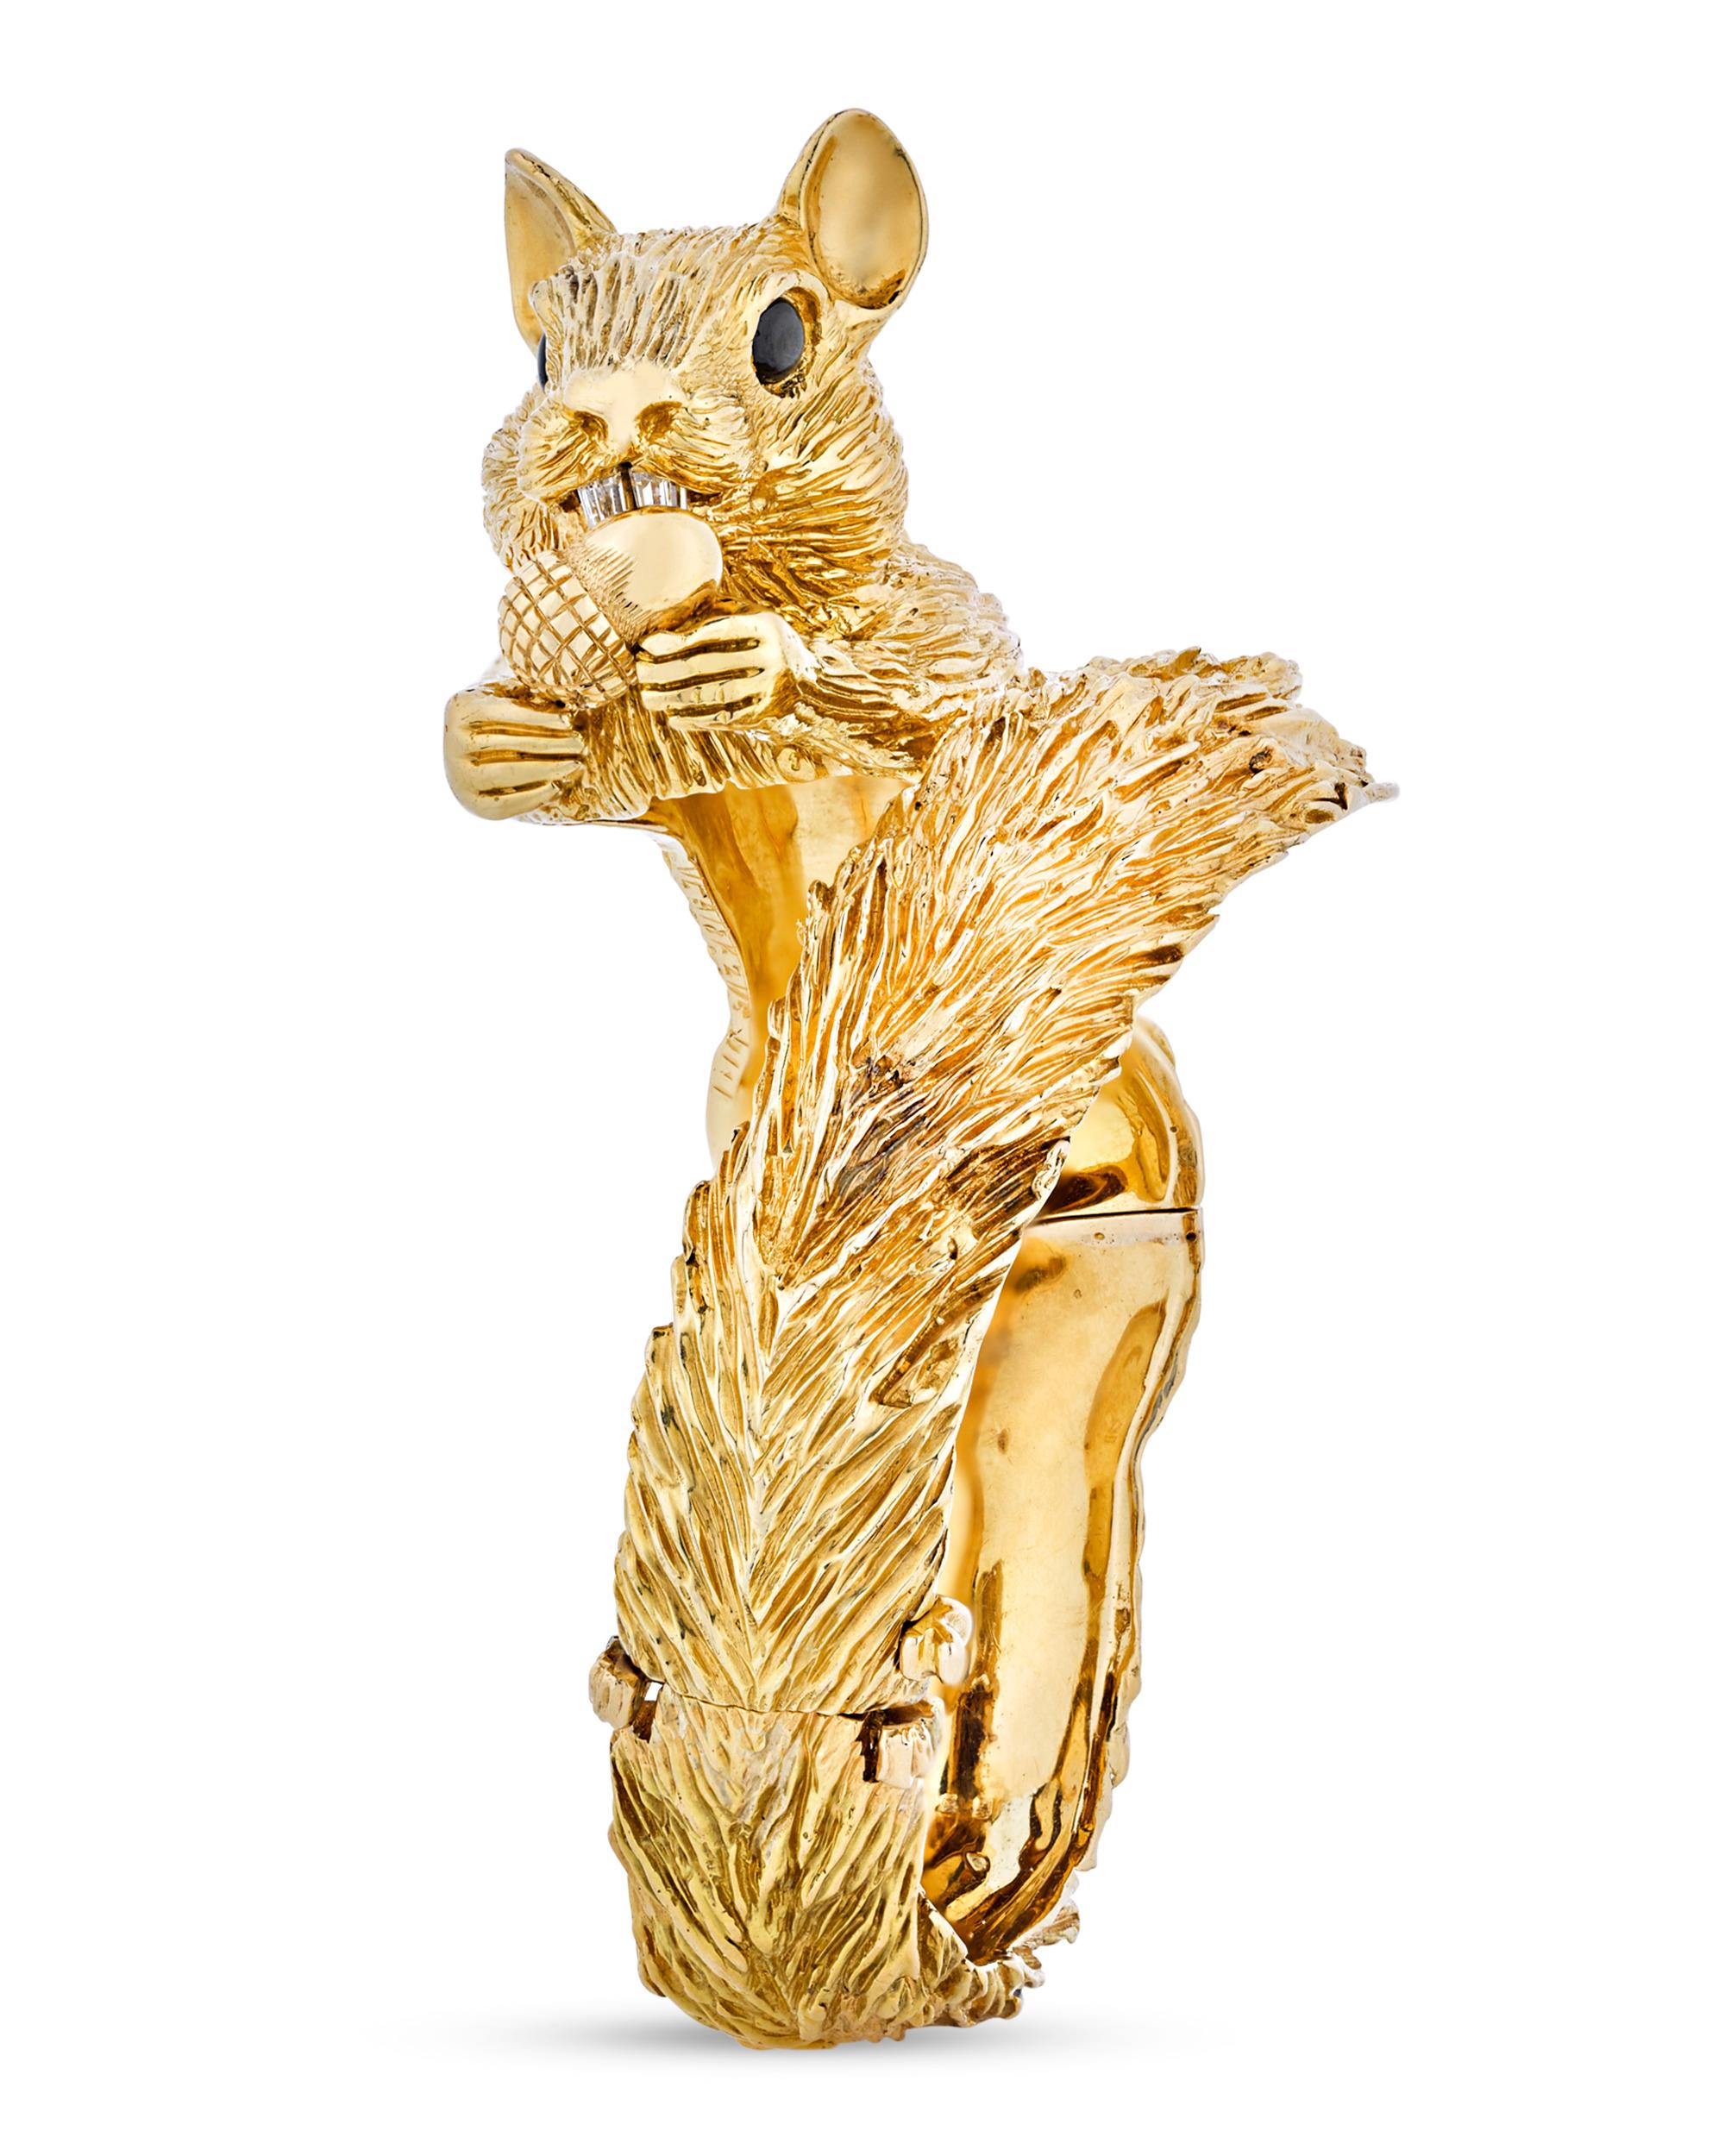 This highly original bracelet by Van Cleef & Arpels represents the famed jewelry house at its most creative. Crafted in the endearing form of a squirrel, the 18K yellow gold bangle is perfectly textured to evoke the coarse fur of the woodland